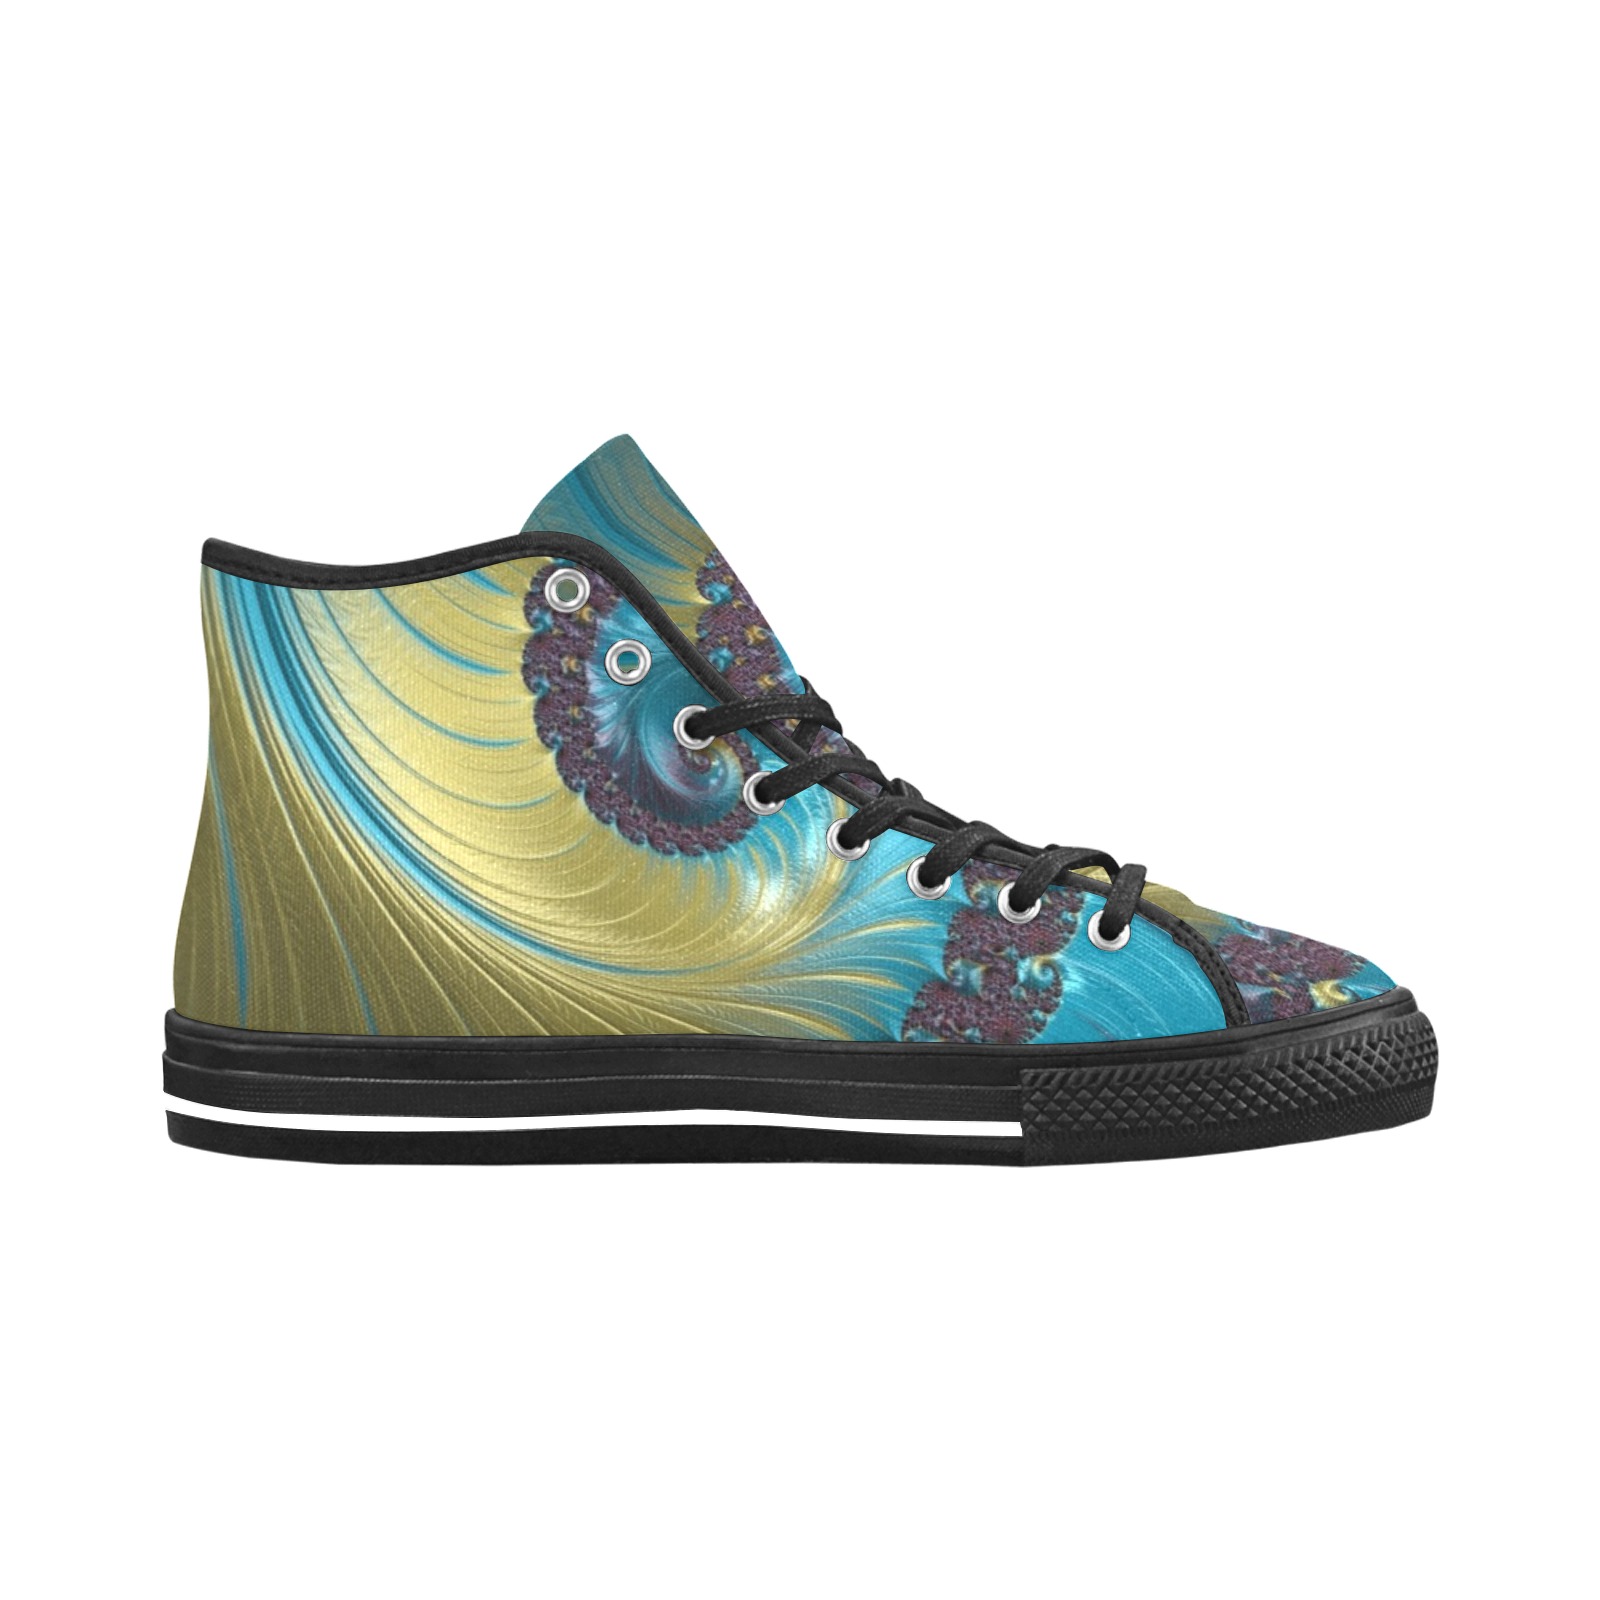 Turquoise and Gold Spiral Fractal Abstract Vancouver H Men's Canvas Shoes (1013-1)